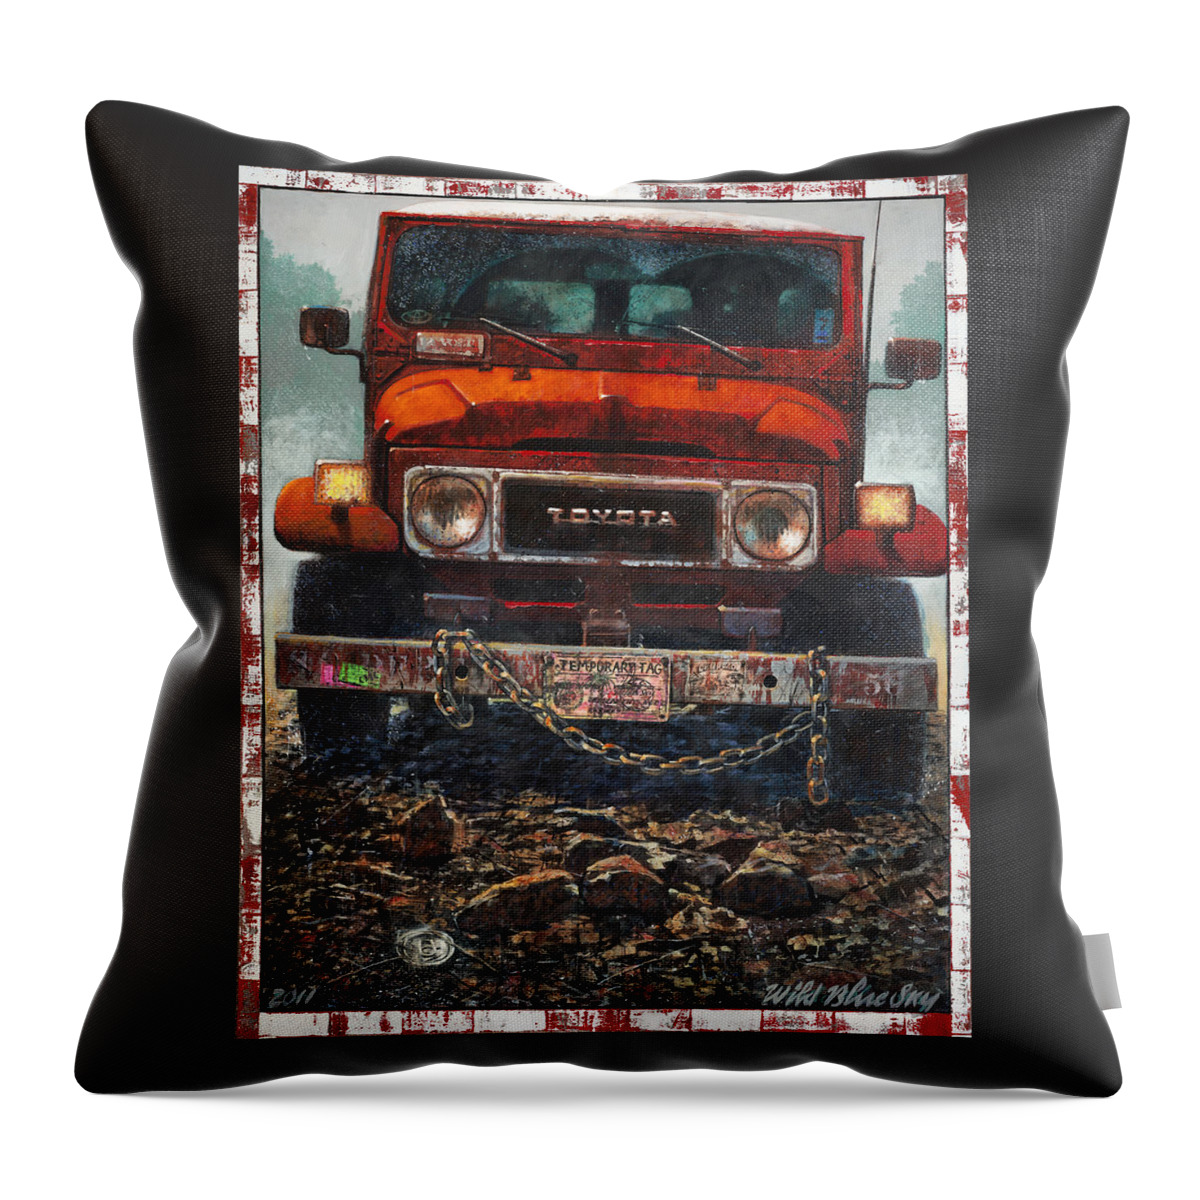 Toyota Throw Pillow featuring the painting Toyota by Blue Sky